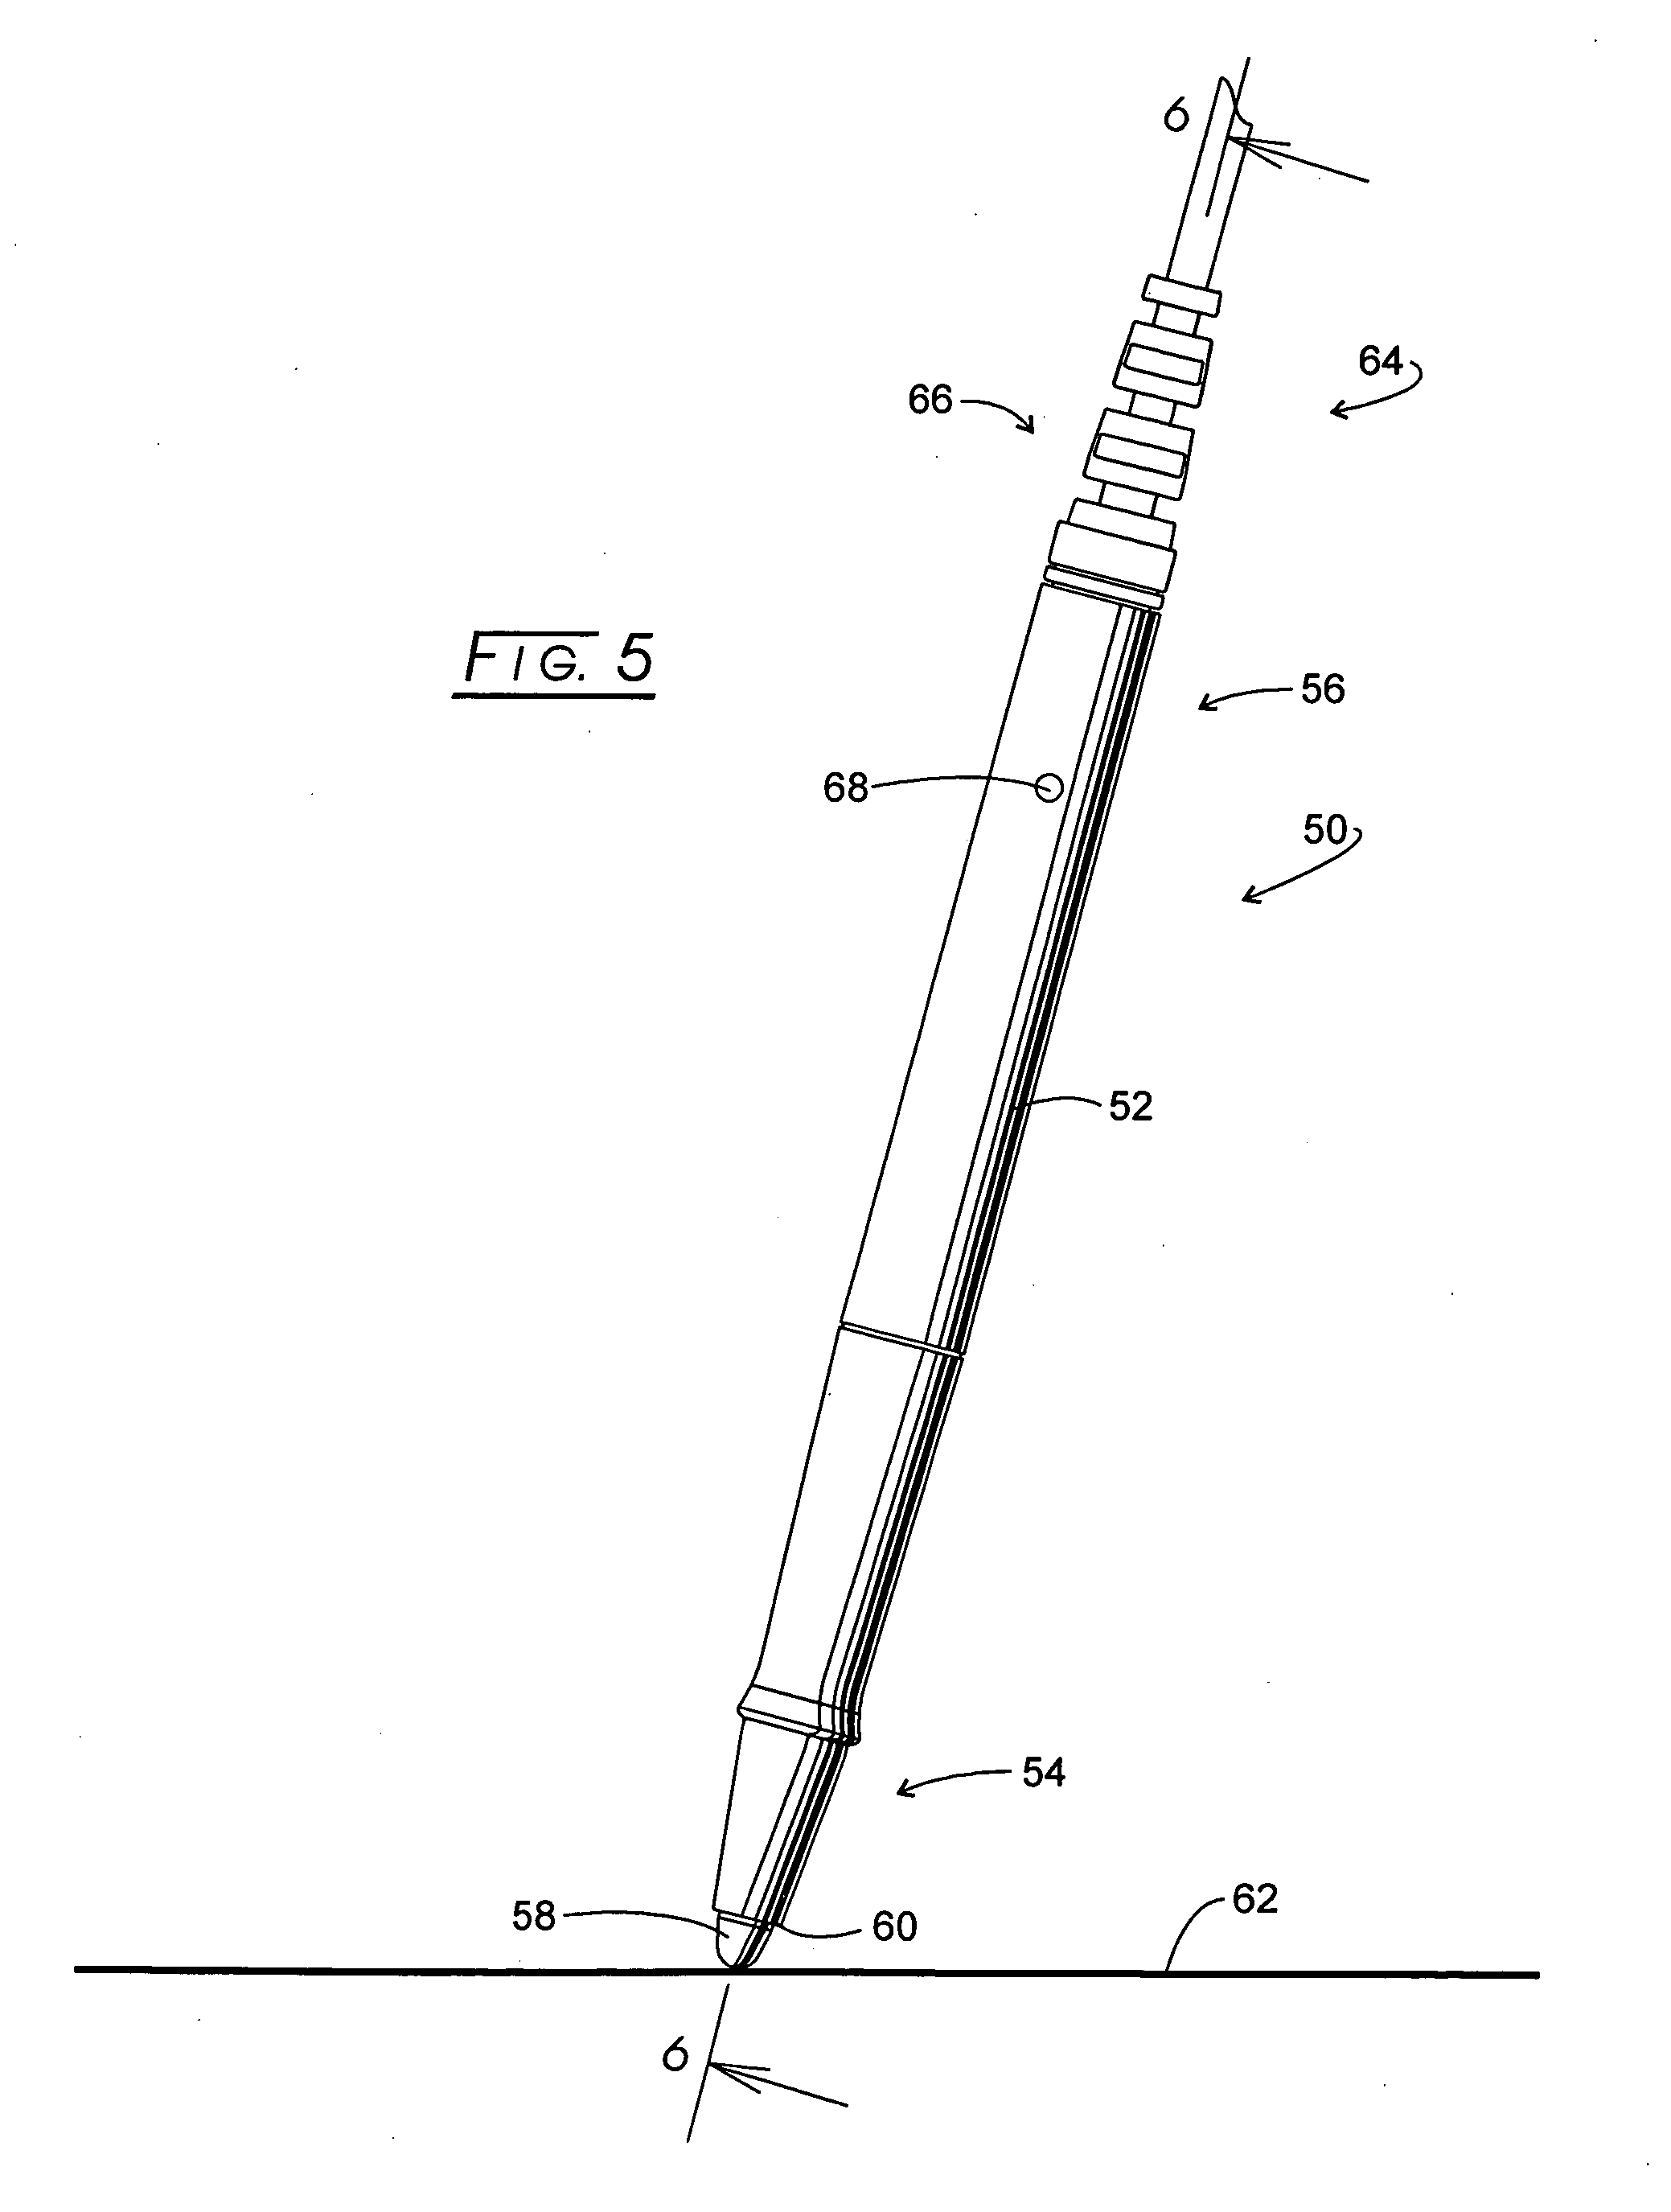 Pen apparatus, system, and method of assembly